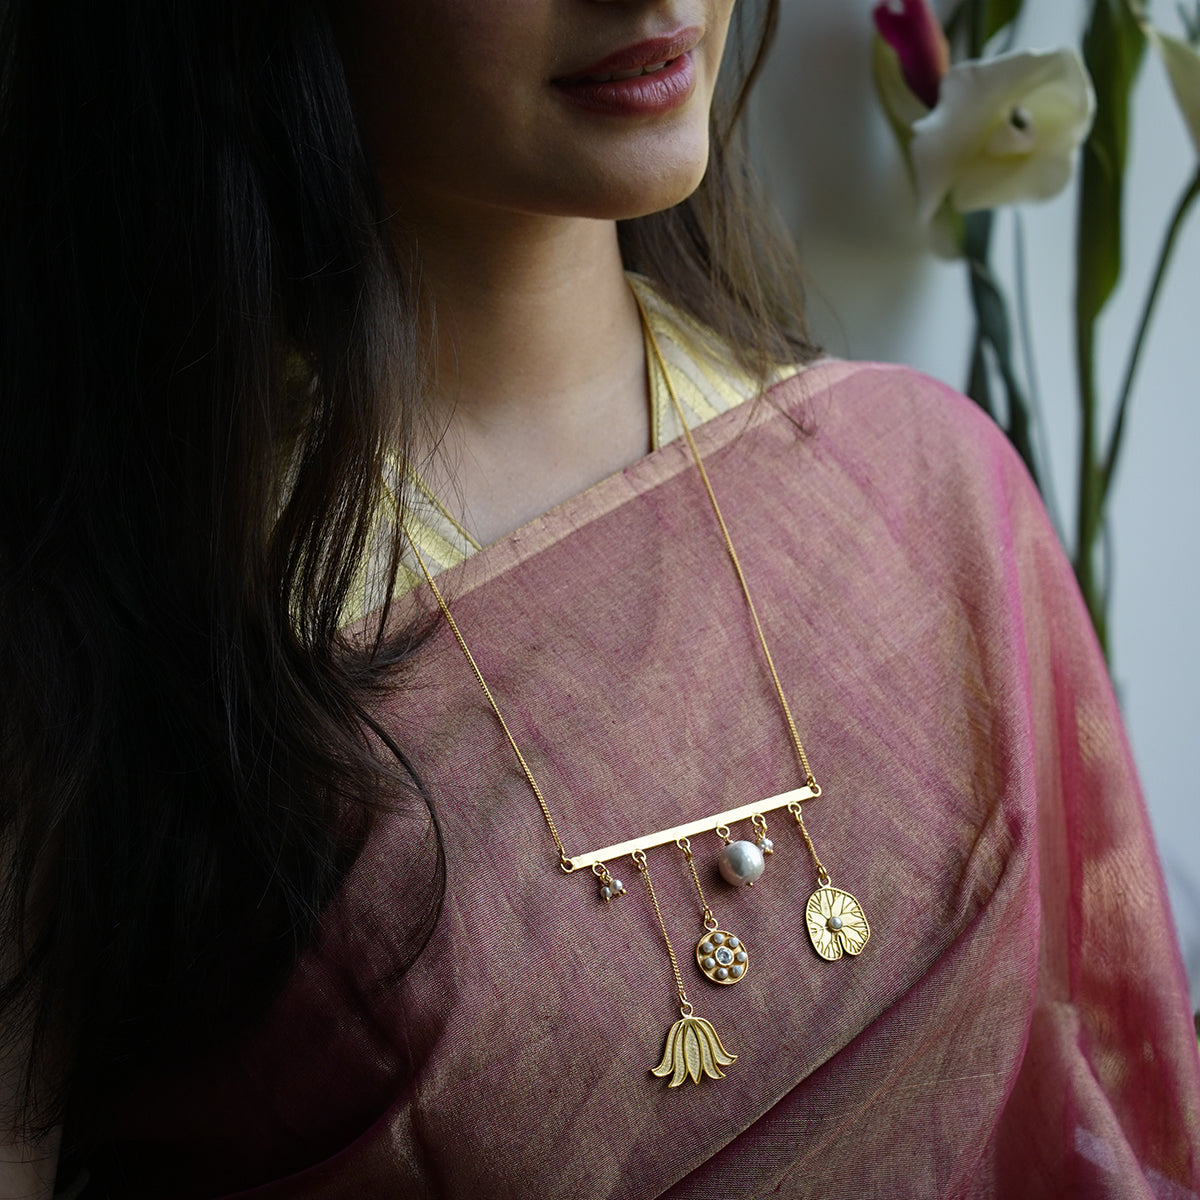 a woman wearing a pink sari and a gold necklace